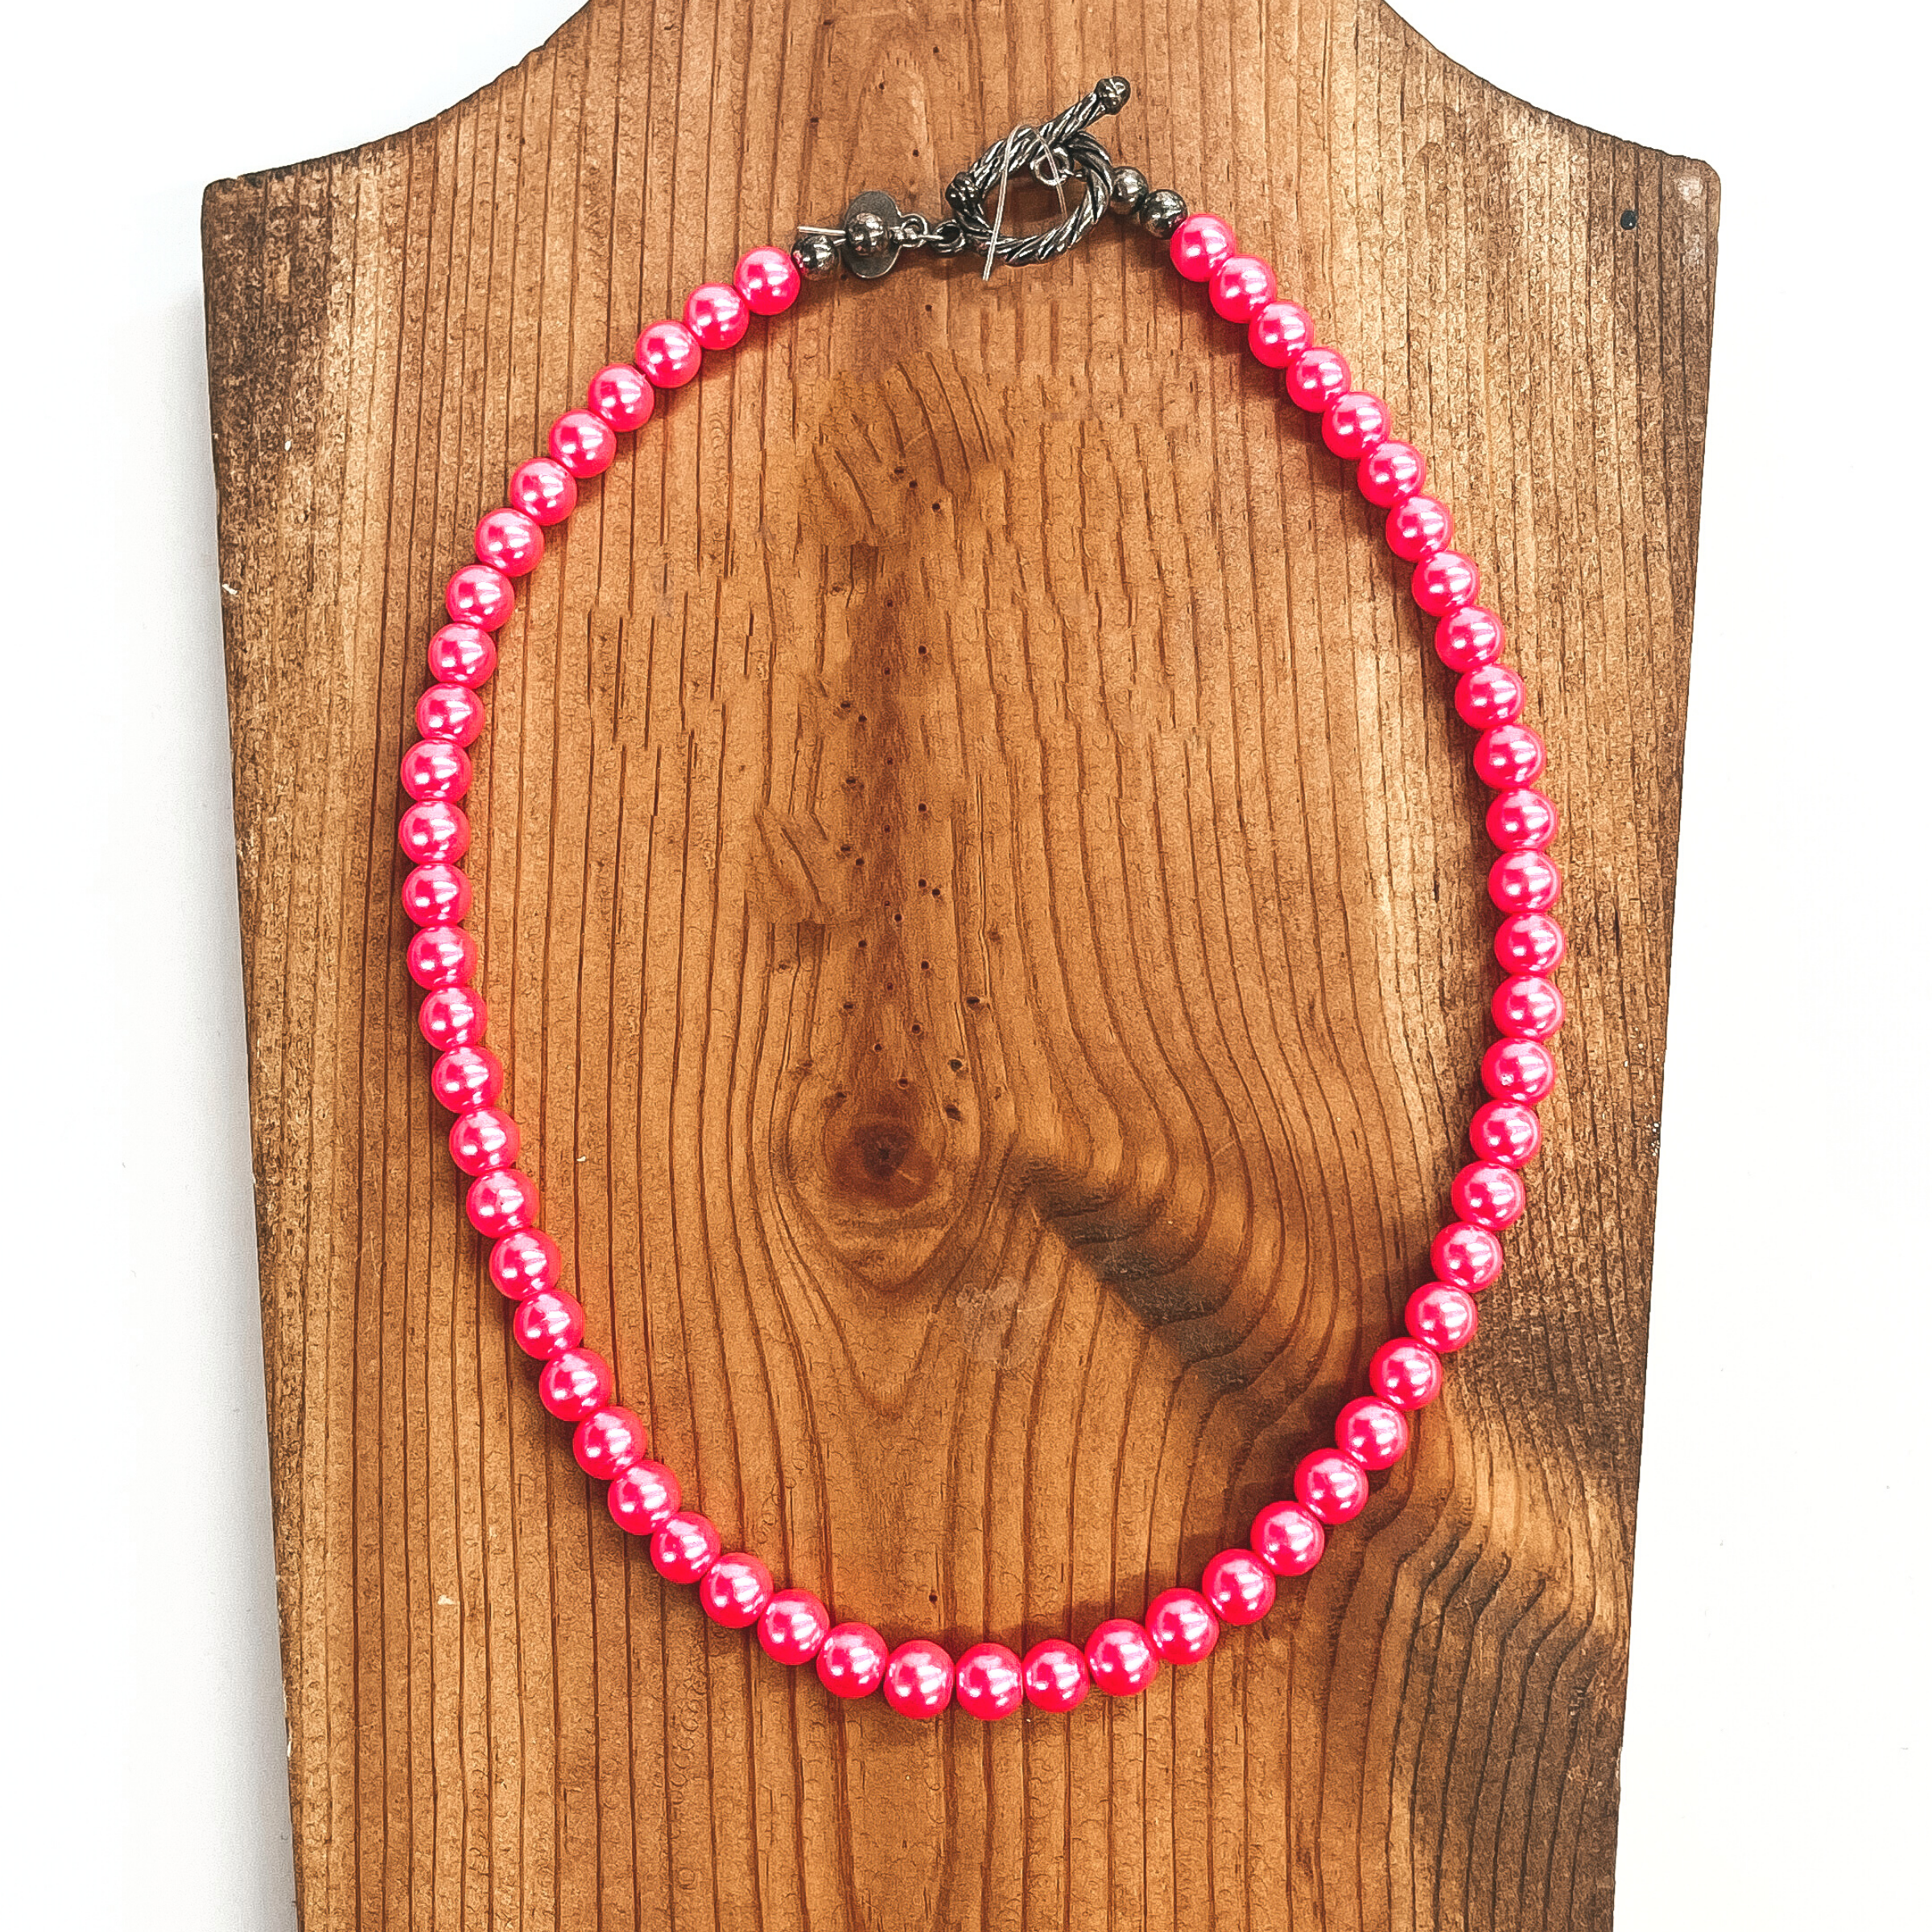 GUG Handmade Pearl Beaded Necklaces in Multicolor - Giddy Up Glamour Boutique